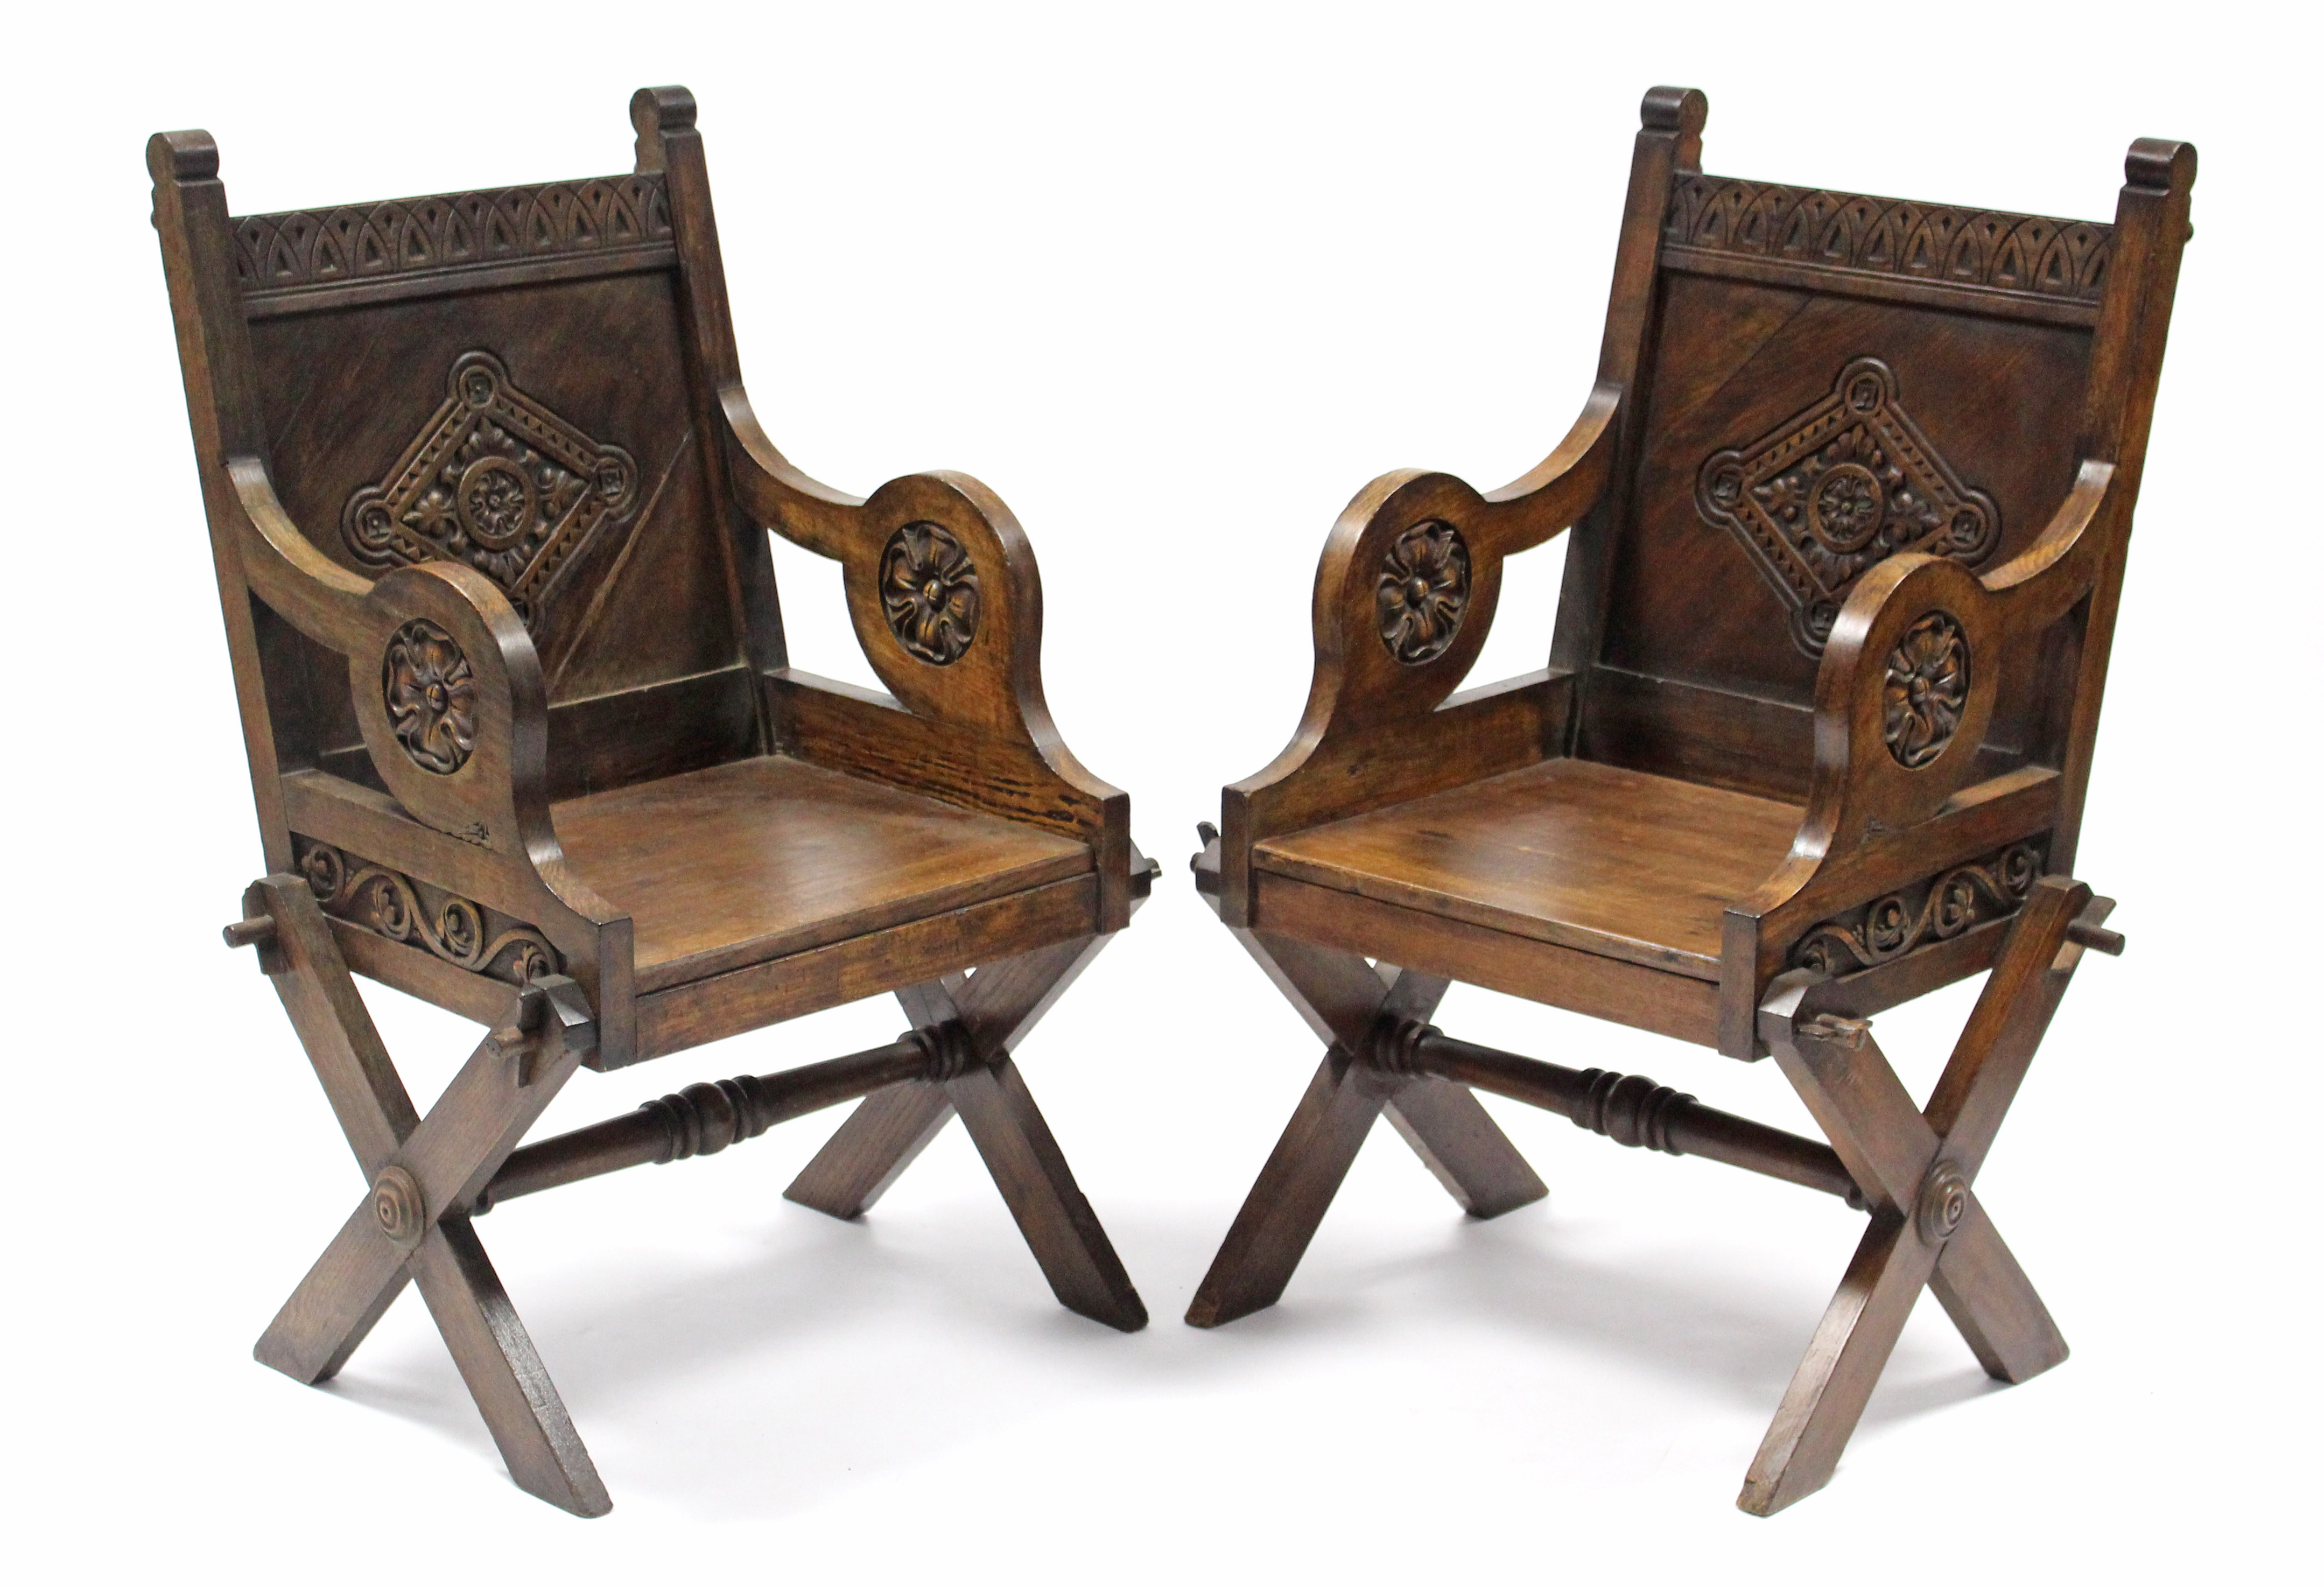 A pair of carved oak Glastonbury-type chairs with hard seats & scroll arms with Tudor Rose motif, on